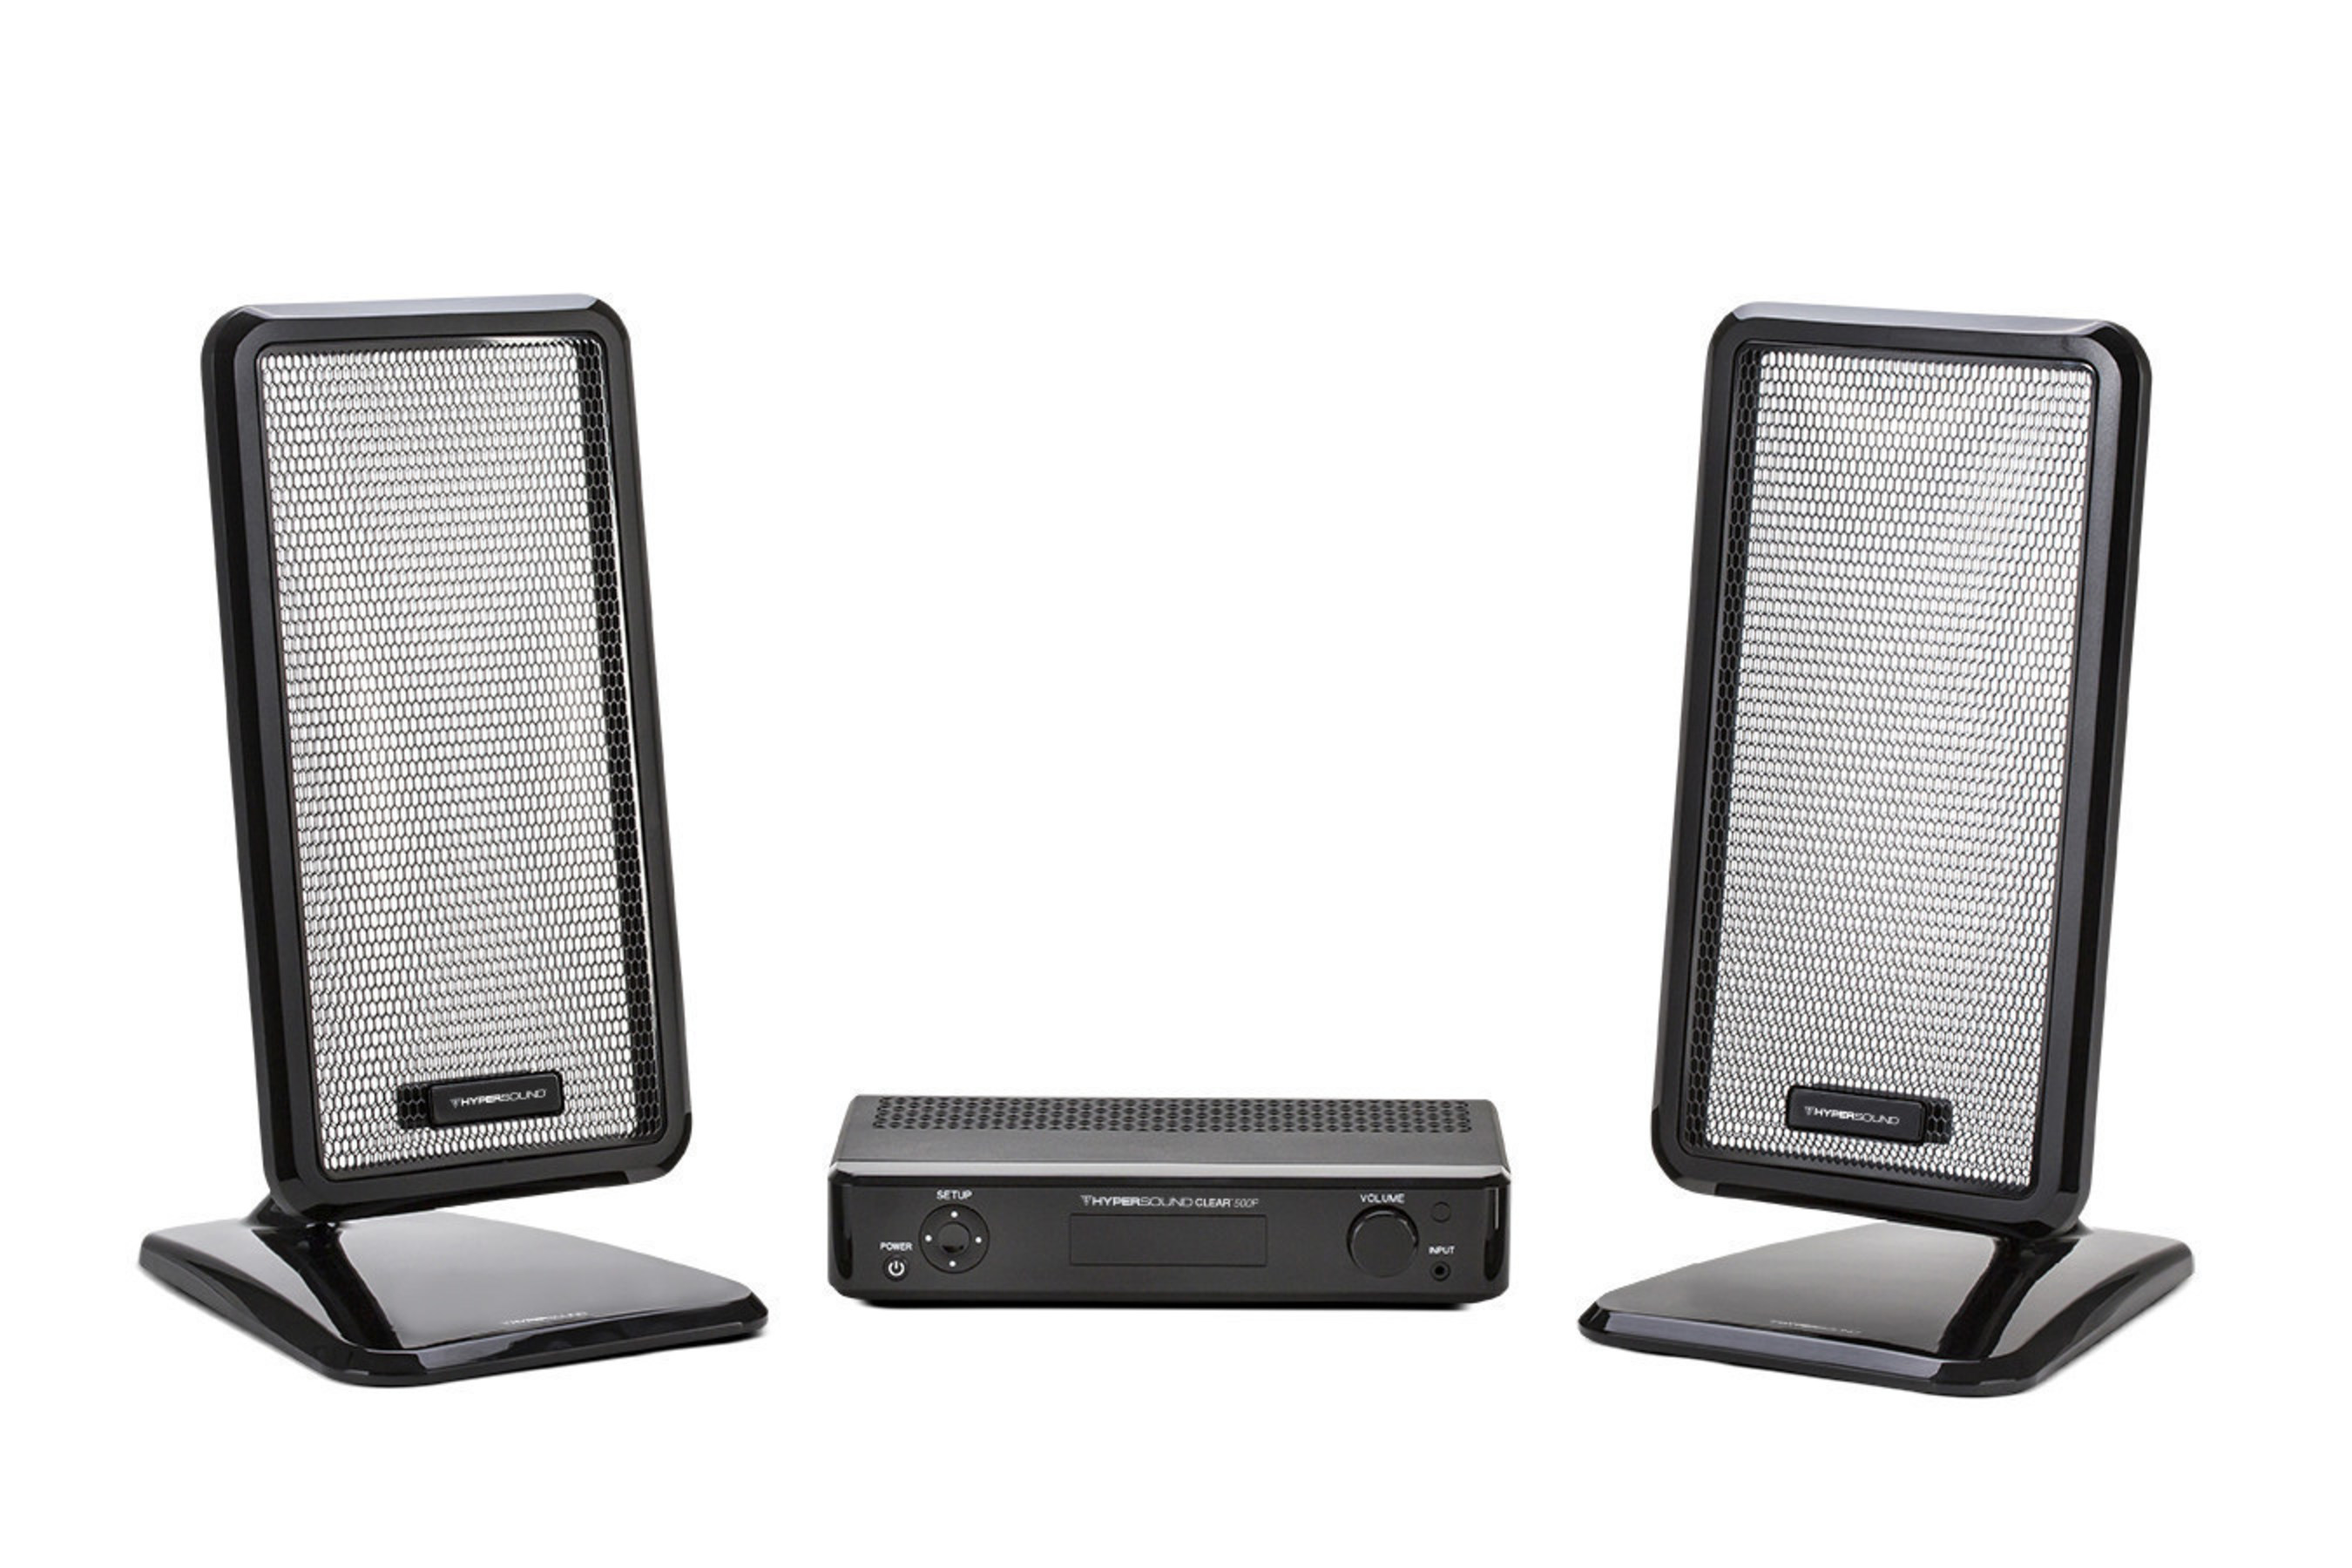 Turtle Beach's HyperSound Clear(TM) is the company's first-of-its-kind directed audio product for people living with hearing loss that's been shown to significantly improve sound clarity and speech intelligibility for a better home entertainment experience.